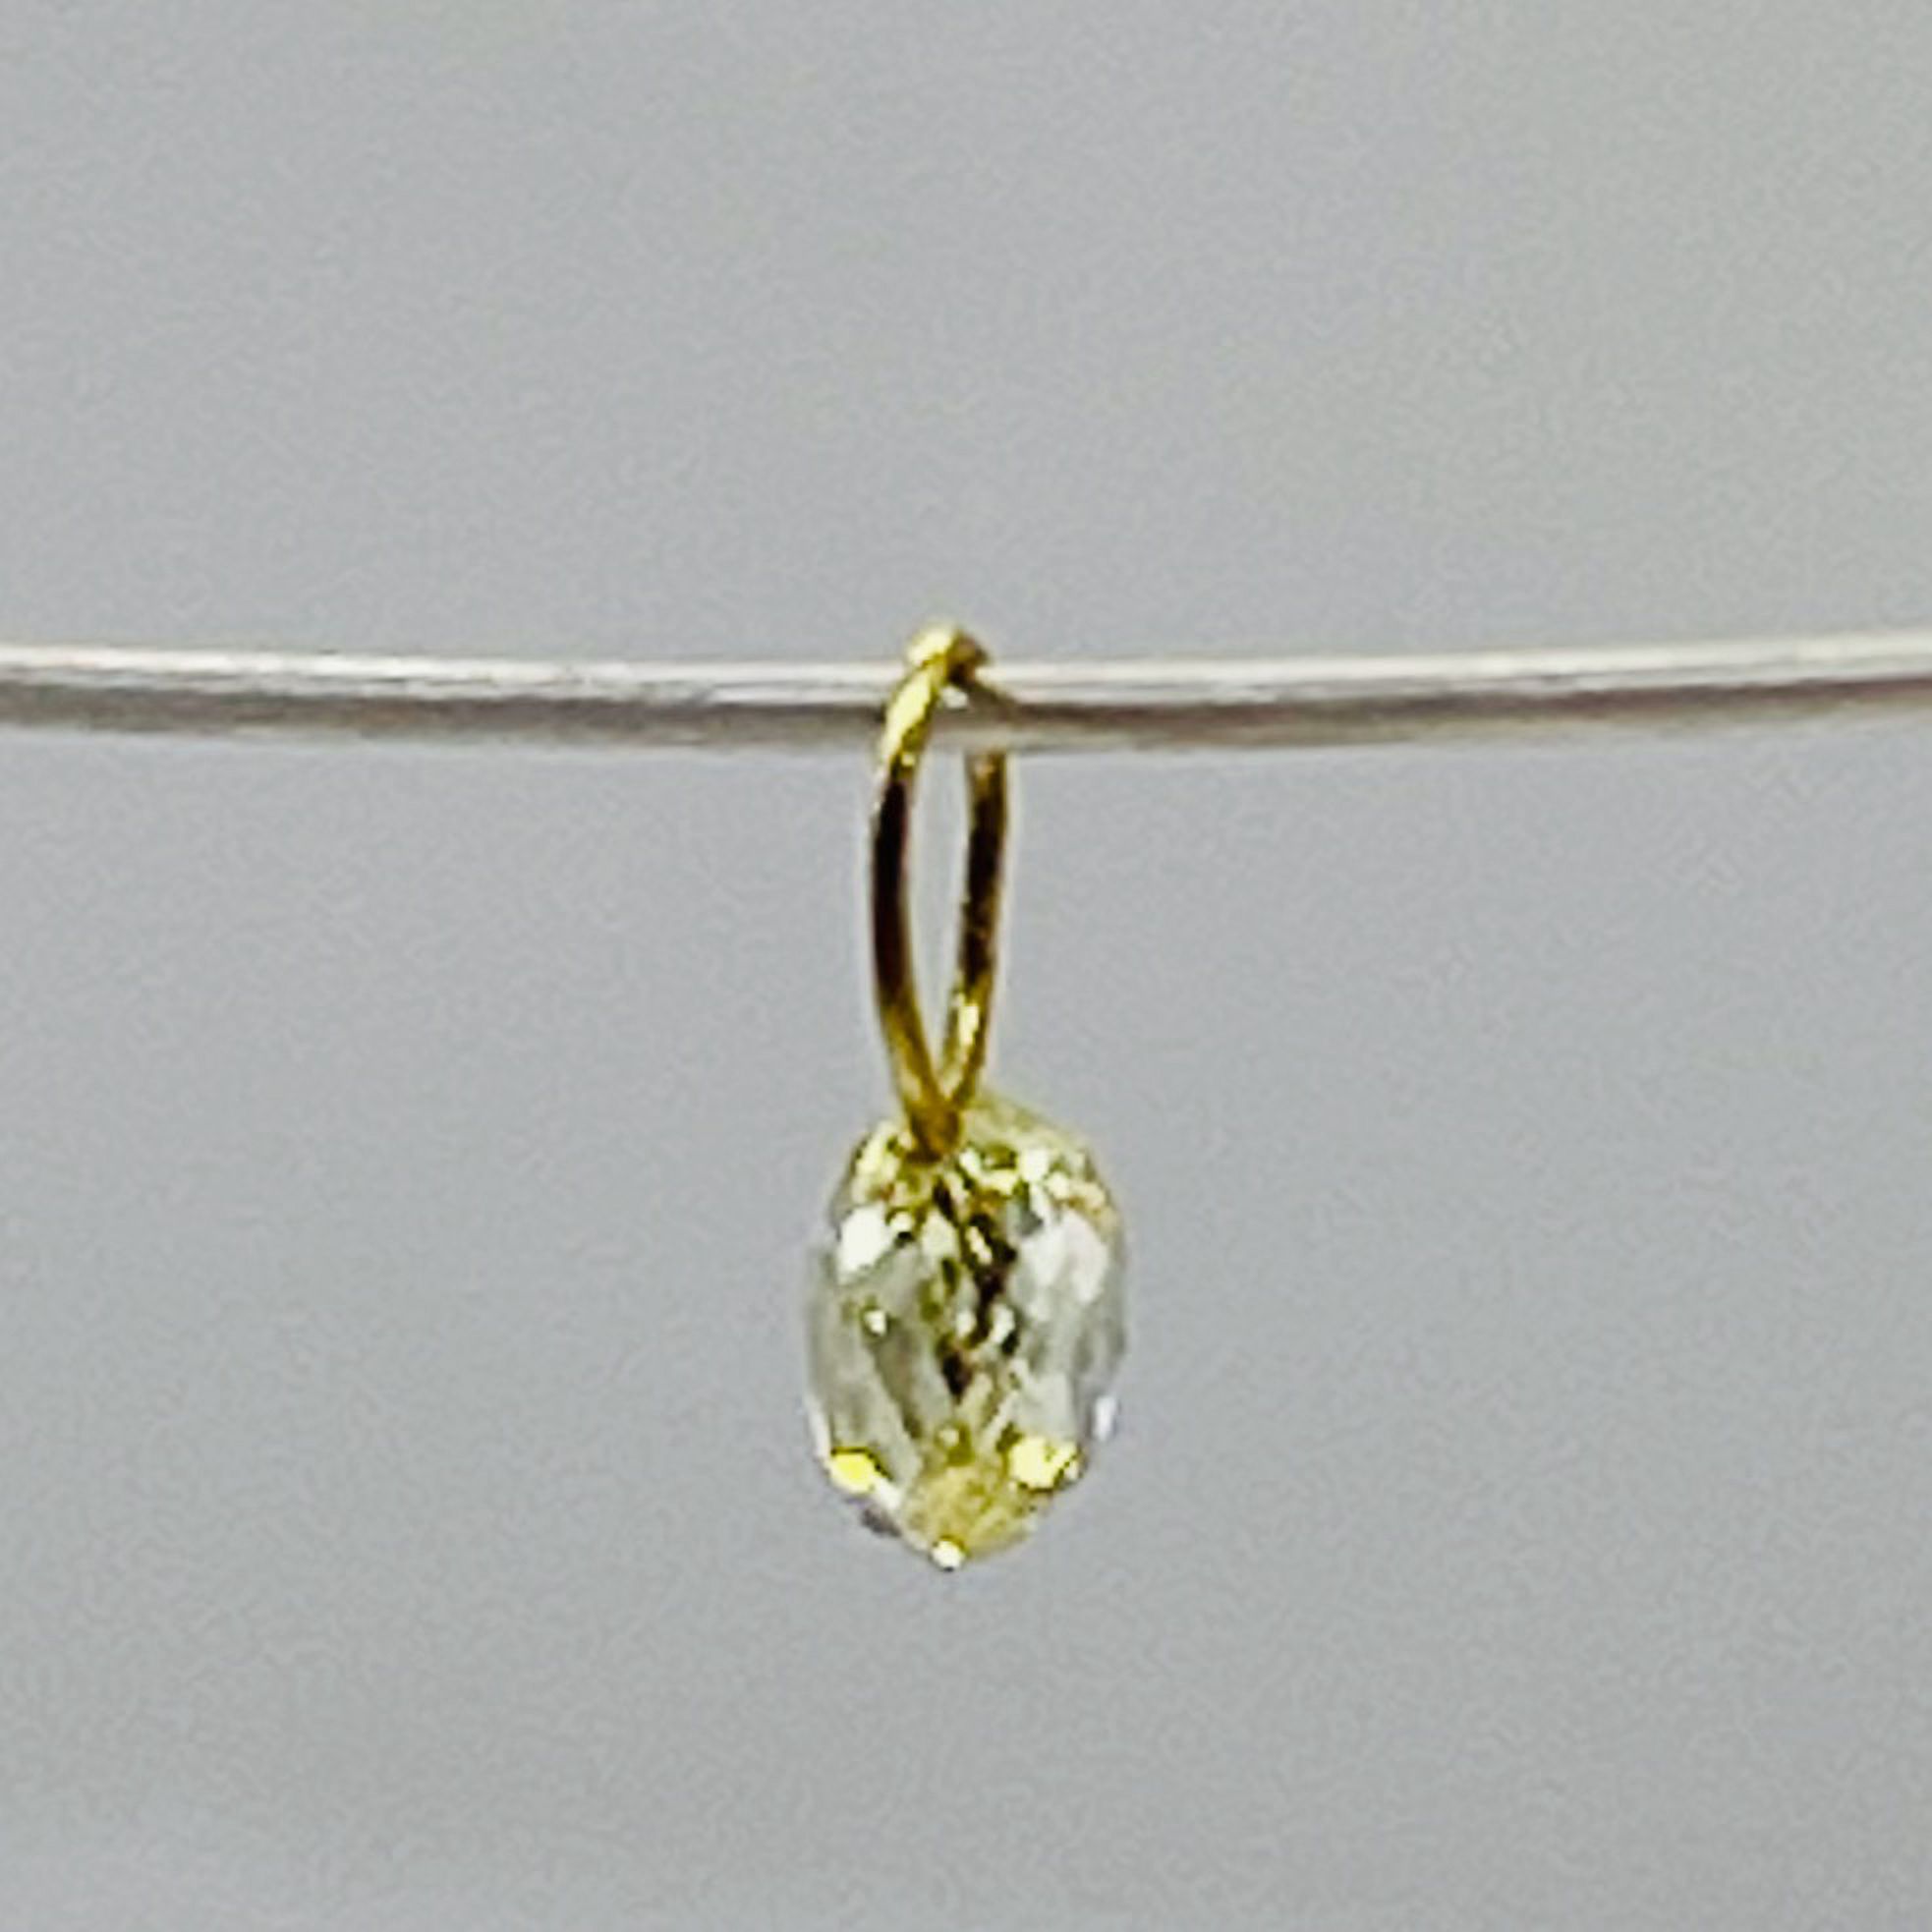 0.21cts Natural Canary 3x2.5x2mm Diamond 18K Gold Pendant 8798P - image 4 of 12